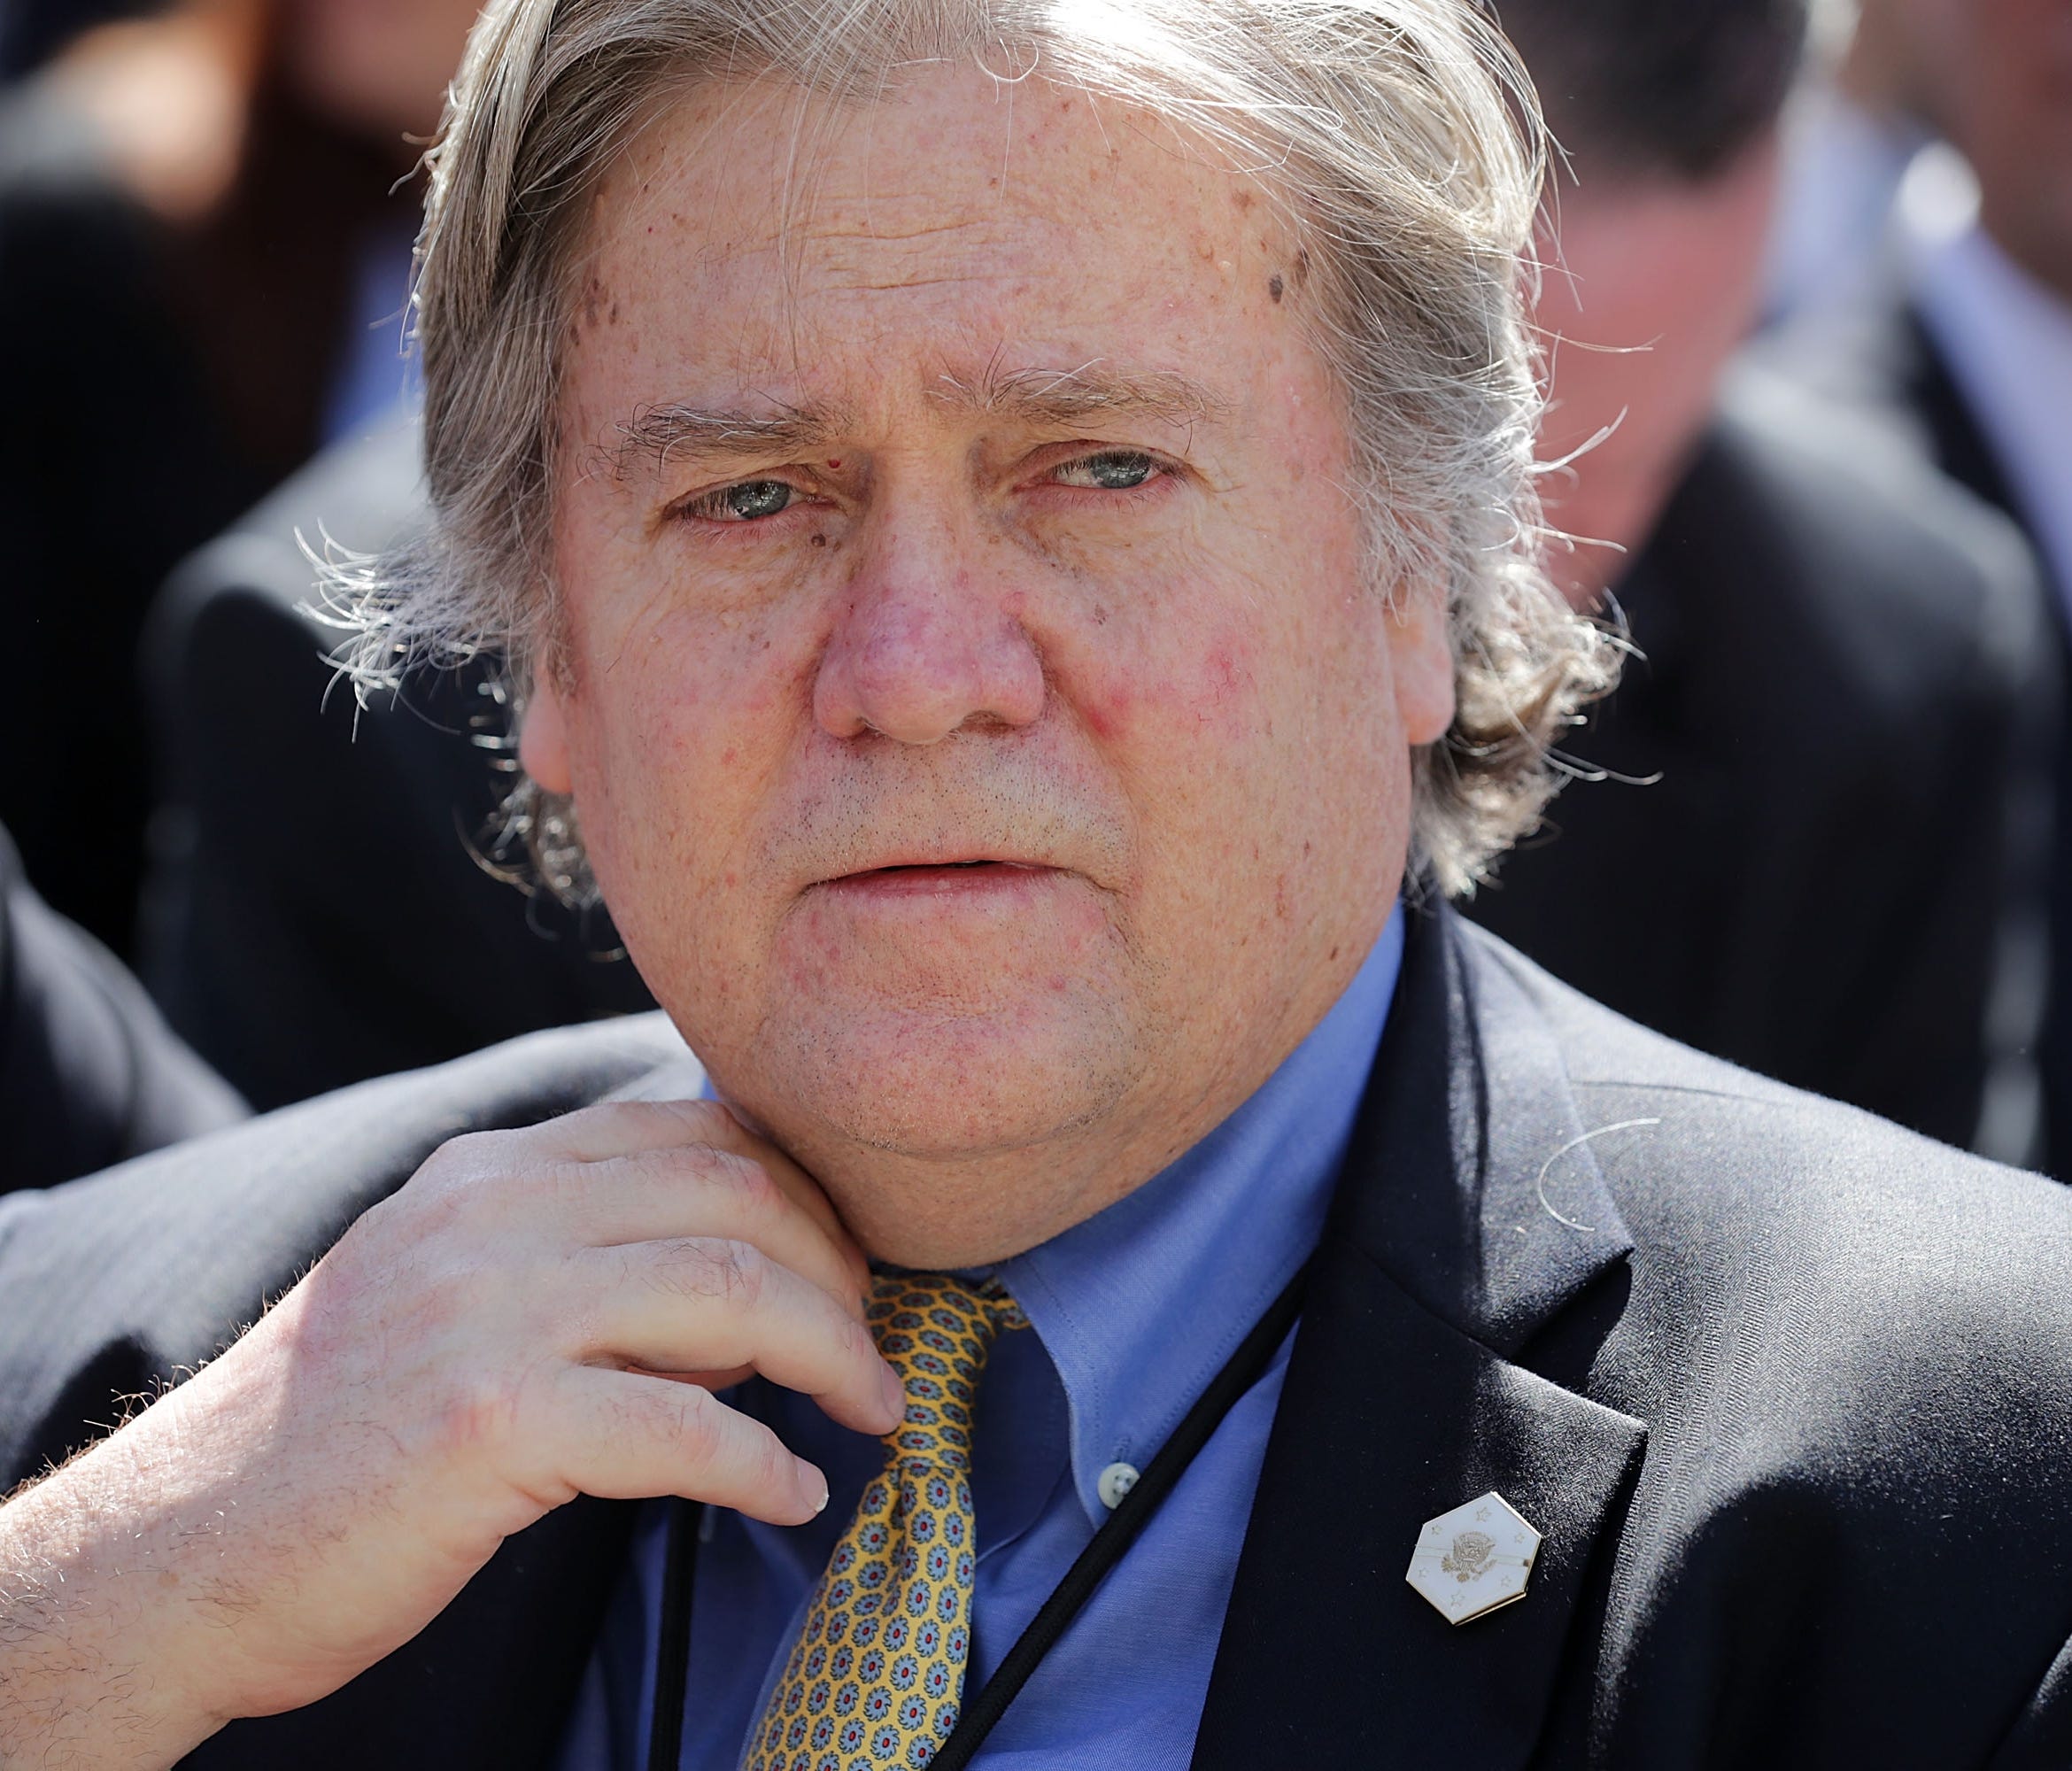 White House adviser Steve Bannon is pictured attending a ceremony at the White House.